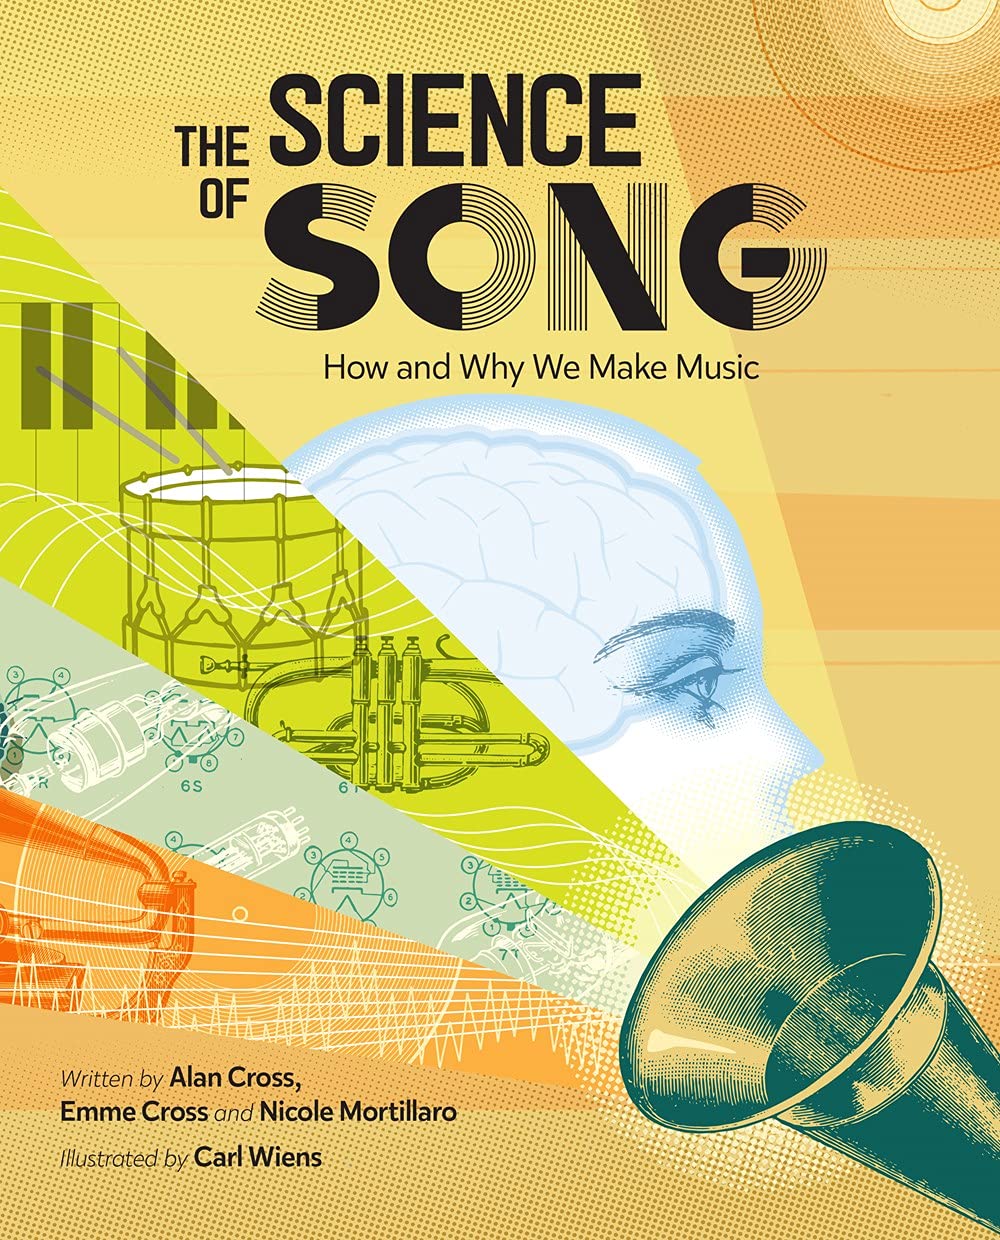 THE SCIENCE OF SONG: HOW AND WHY WE MAKE MUSIC - HARDCOVER BOOK